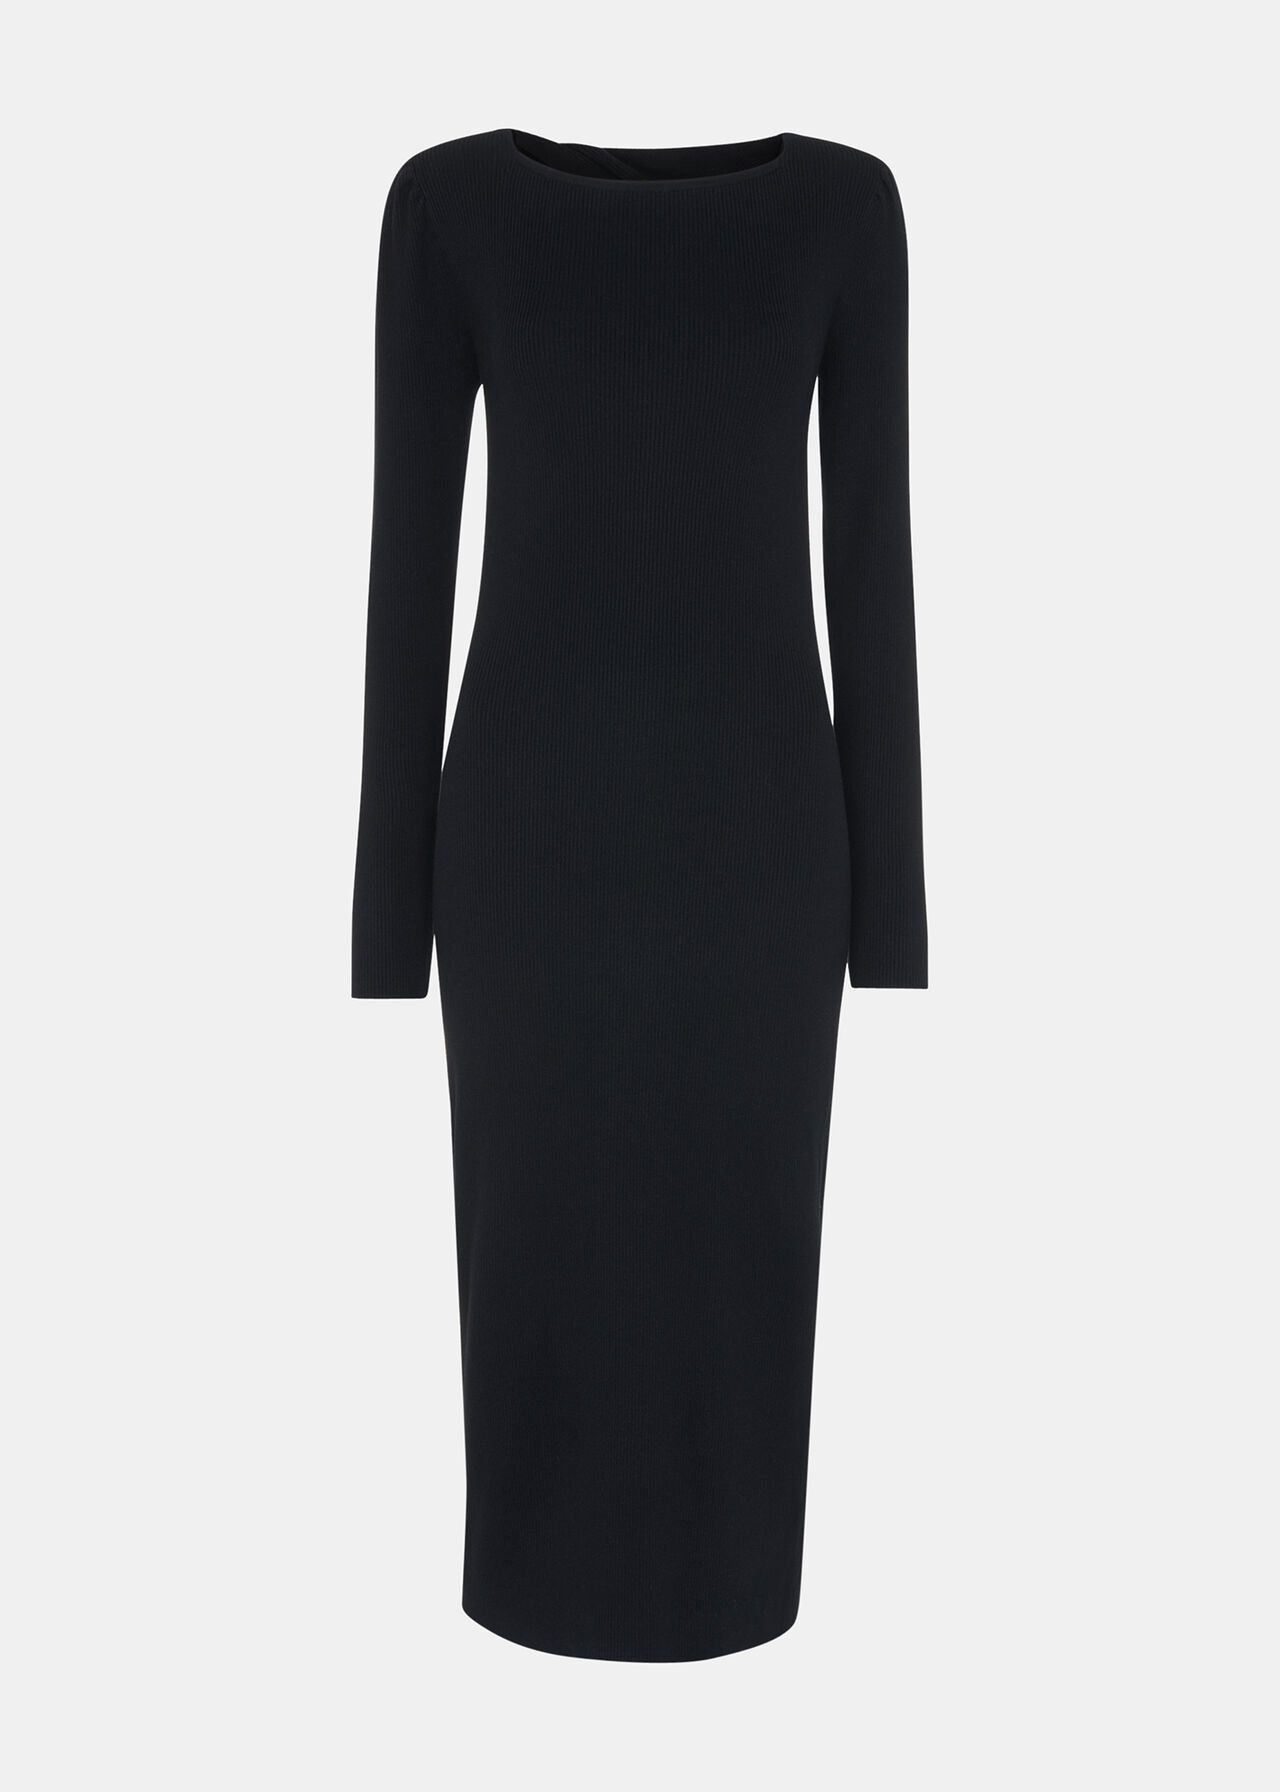 Black Cut Out Twist Knitted Dress | WHISTLES